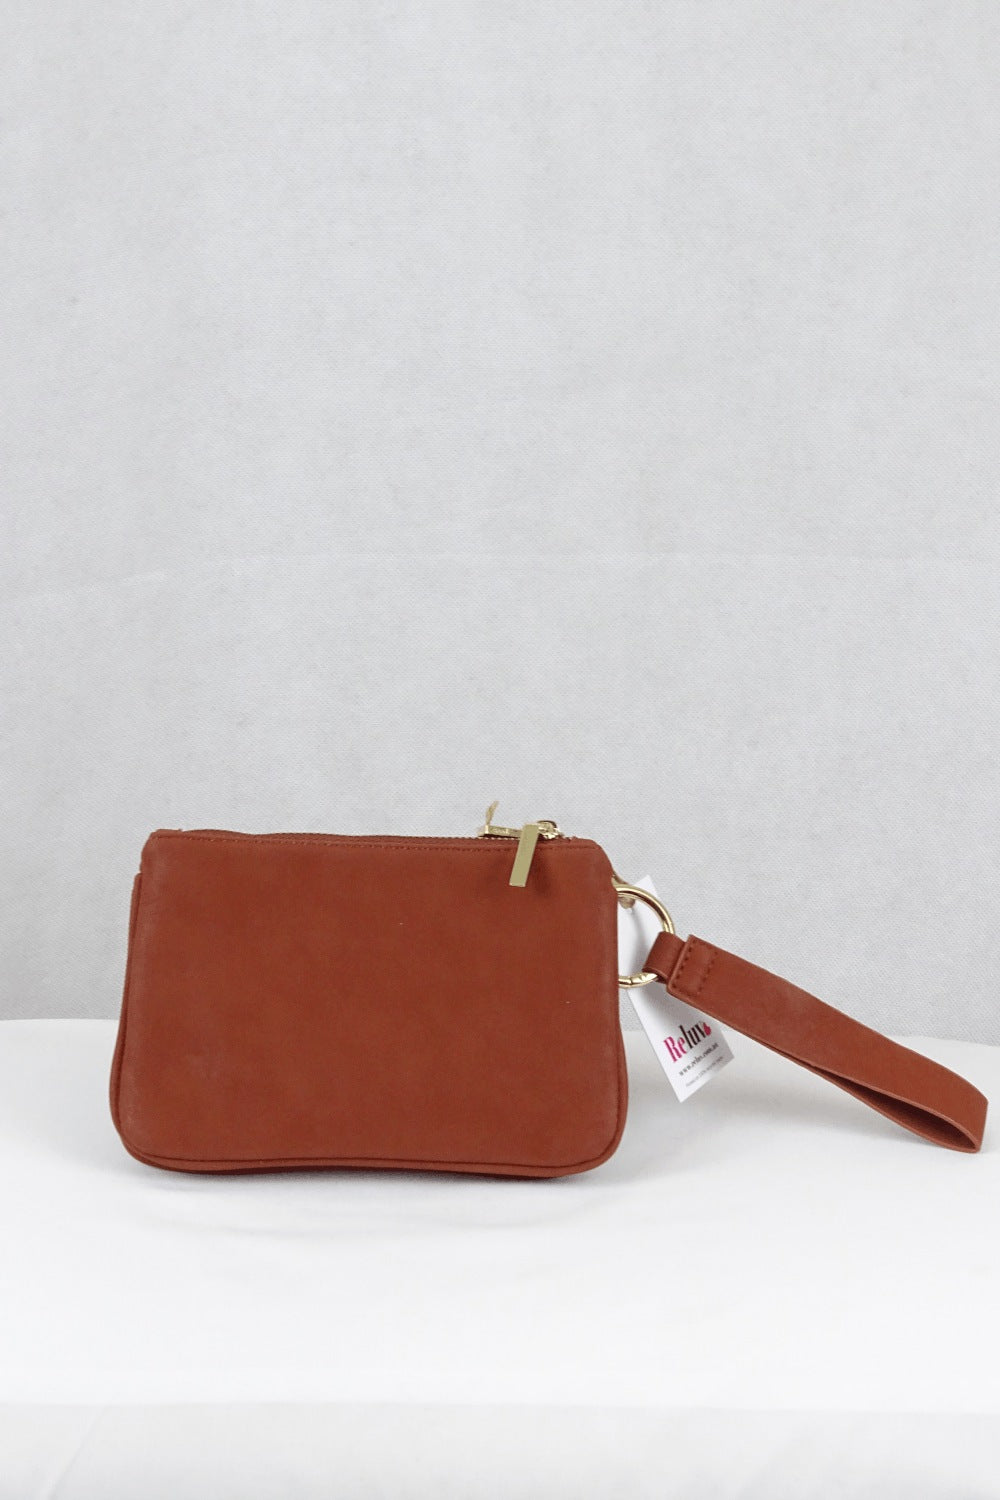 Seed Brown Clutch